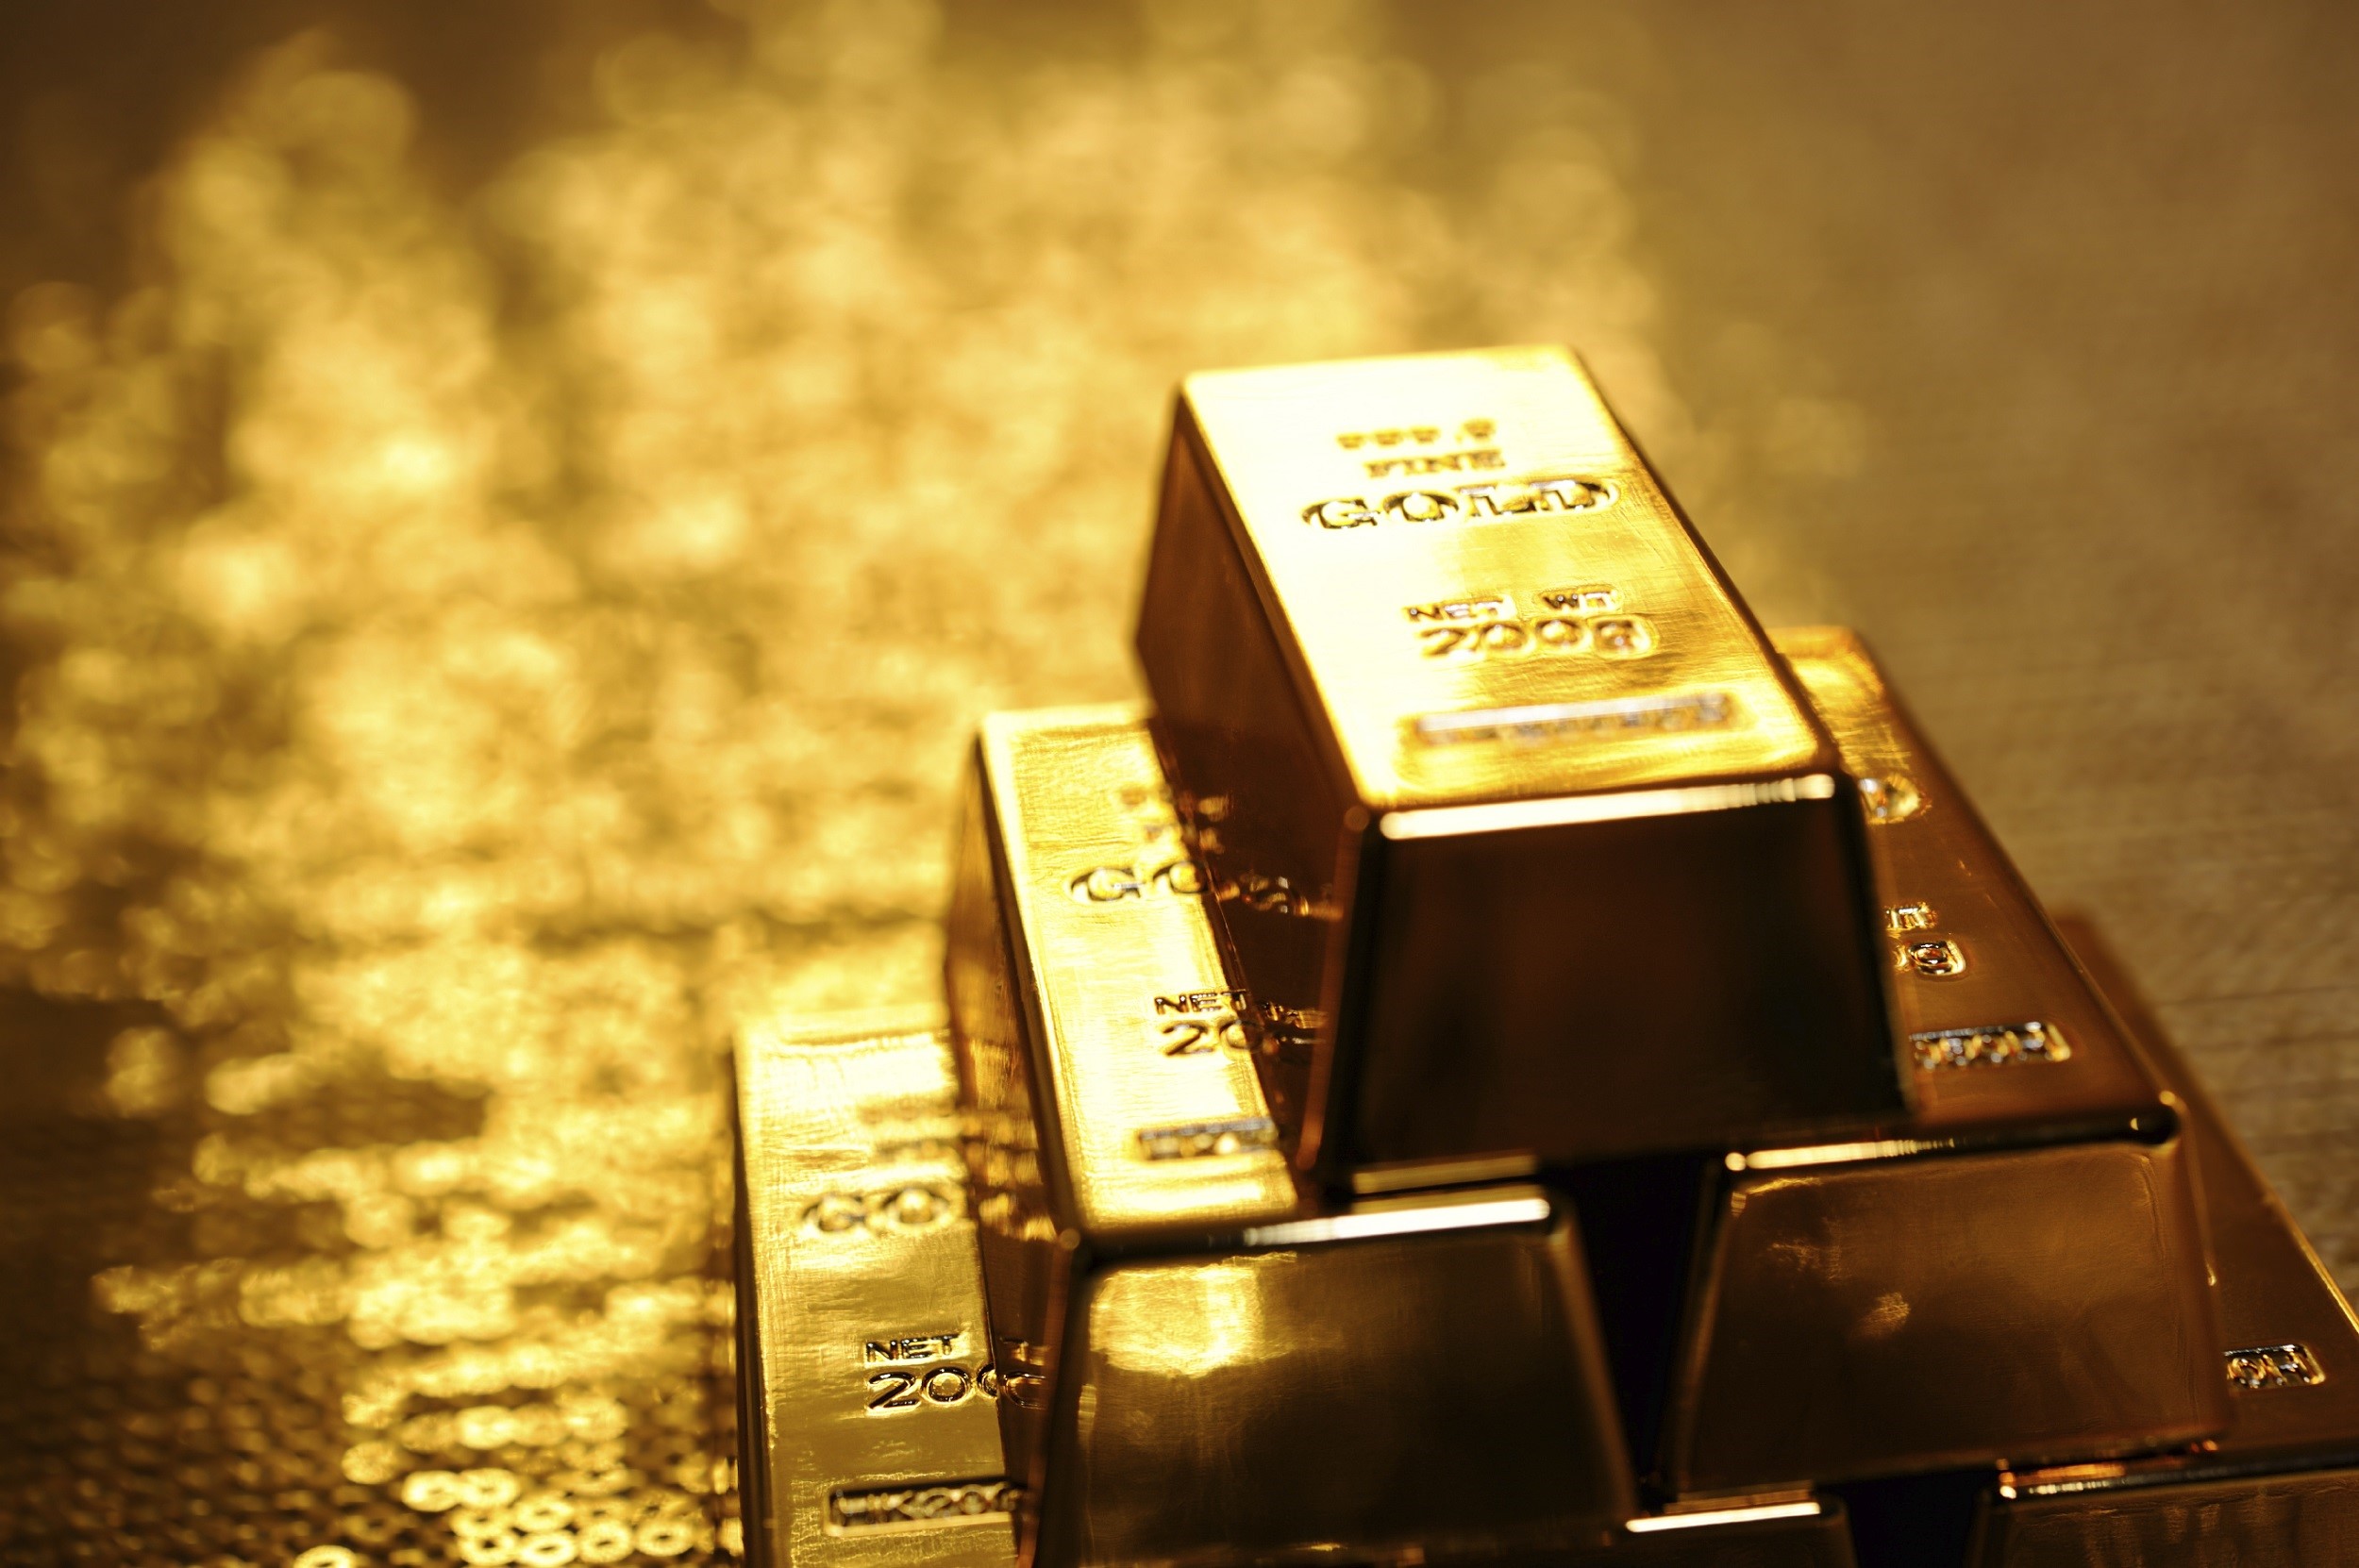 Think Twice Before Opening A Gold Or Silver Ira - Forbes